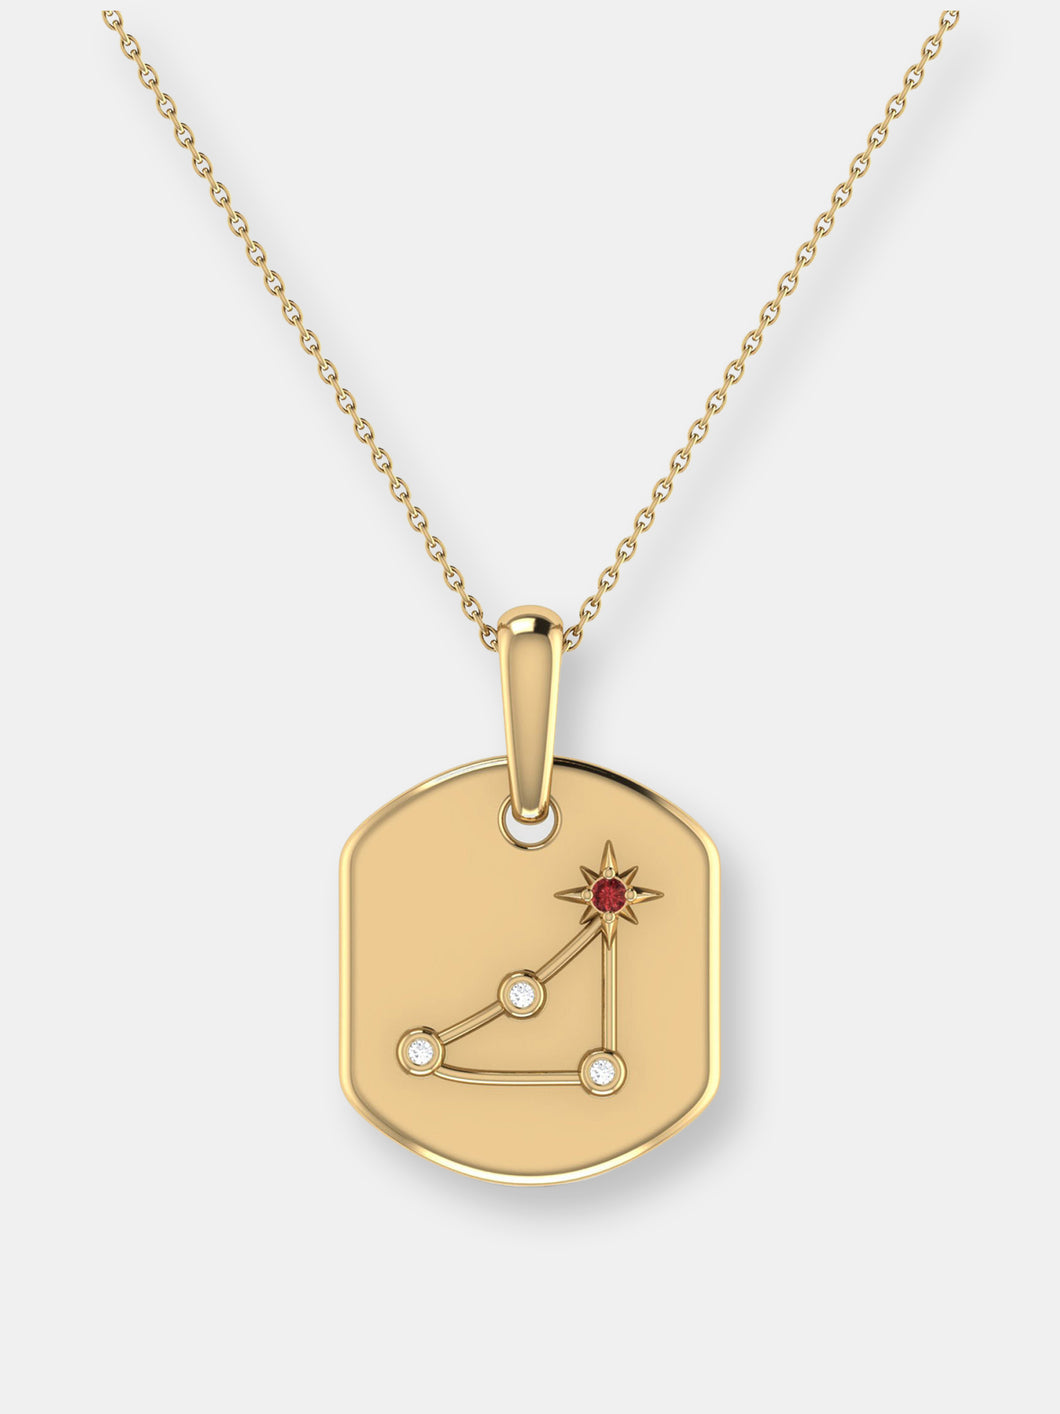 Capricorn Goat Garnet & Diamond Constellation Tag Pendant Necklace in 14K Yellow Gold Vermeil on Sterling Silver